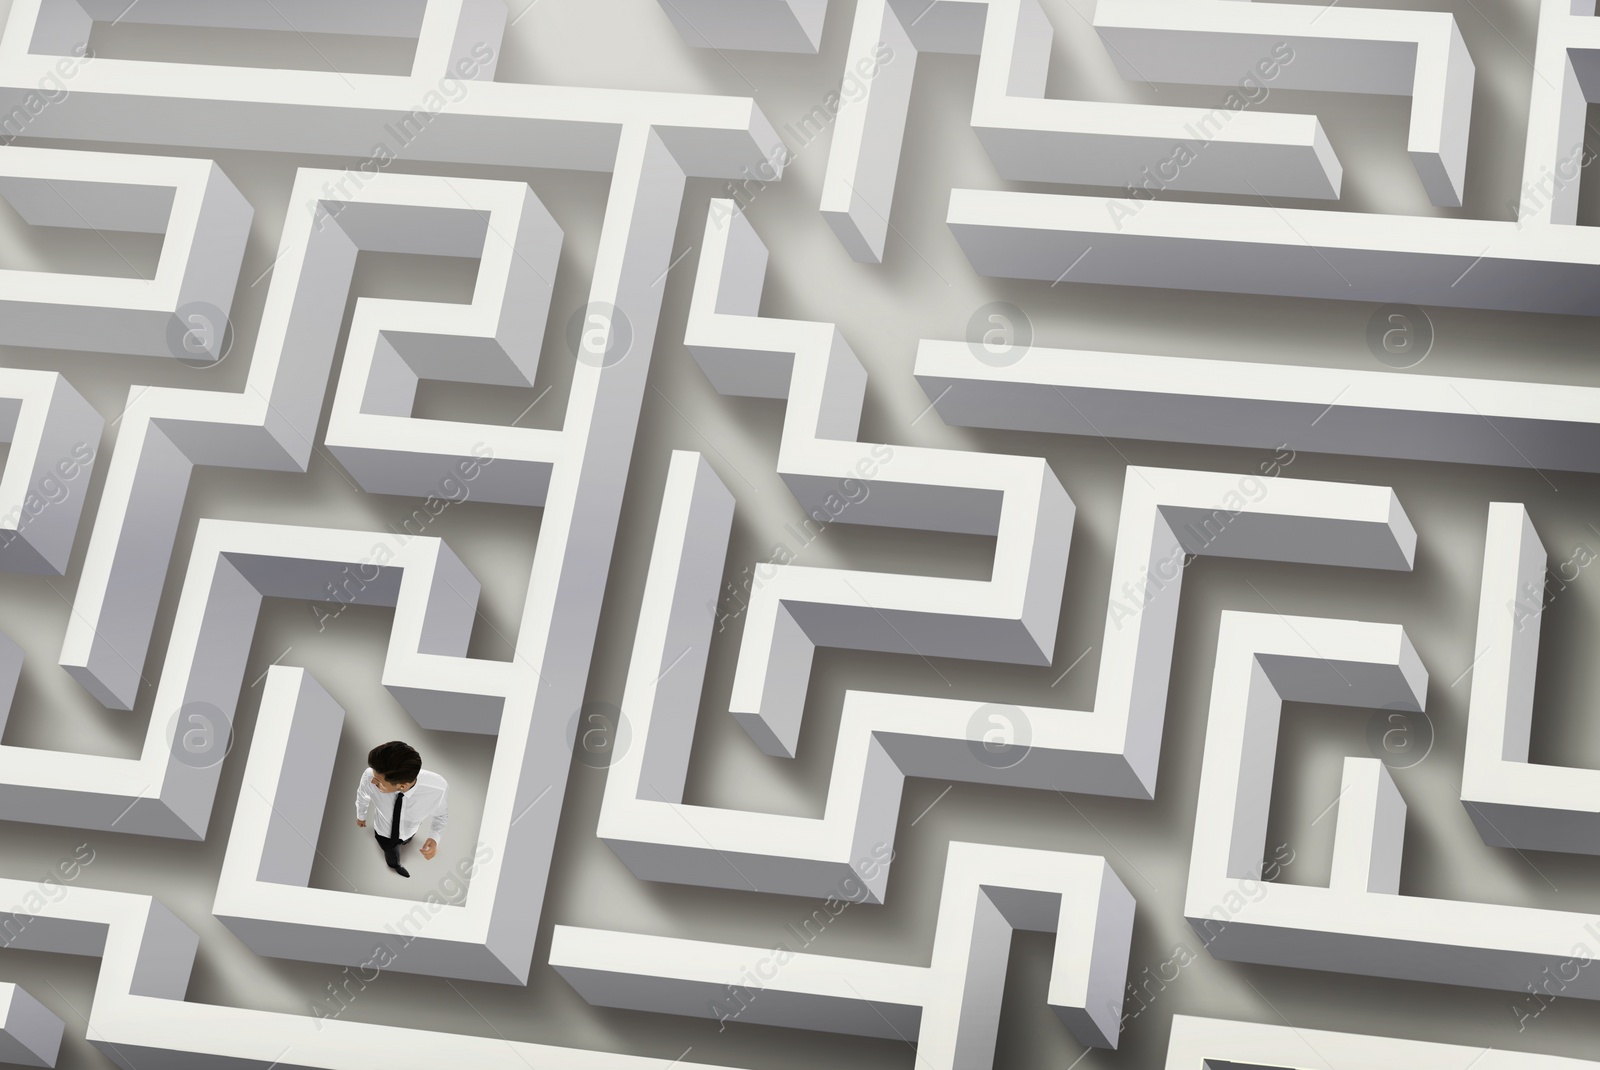 Image of Thoughtful businessman trying to find way out of maze, above view